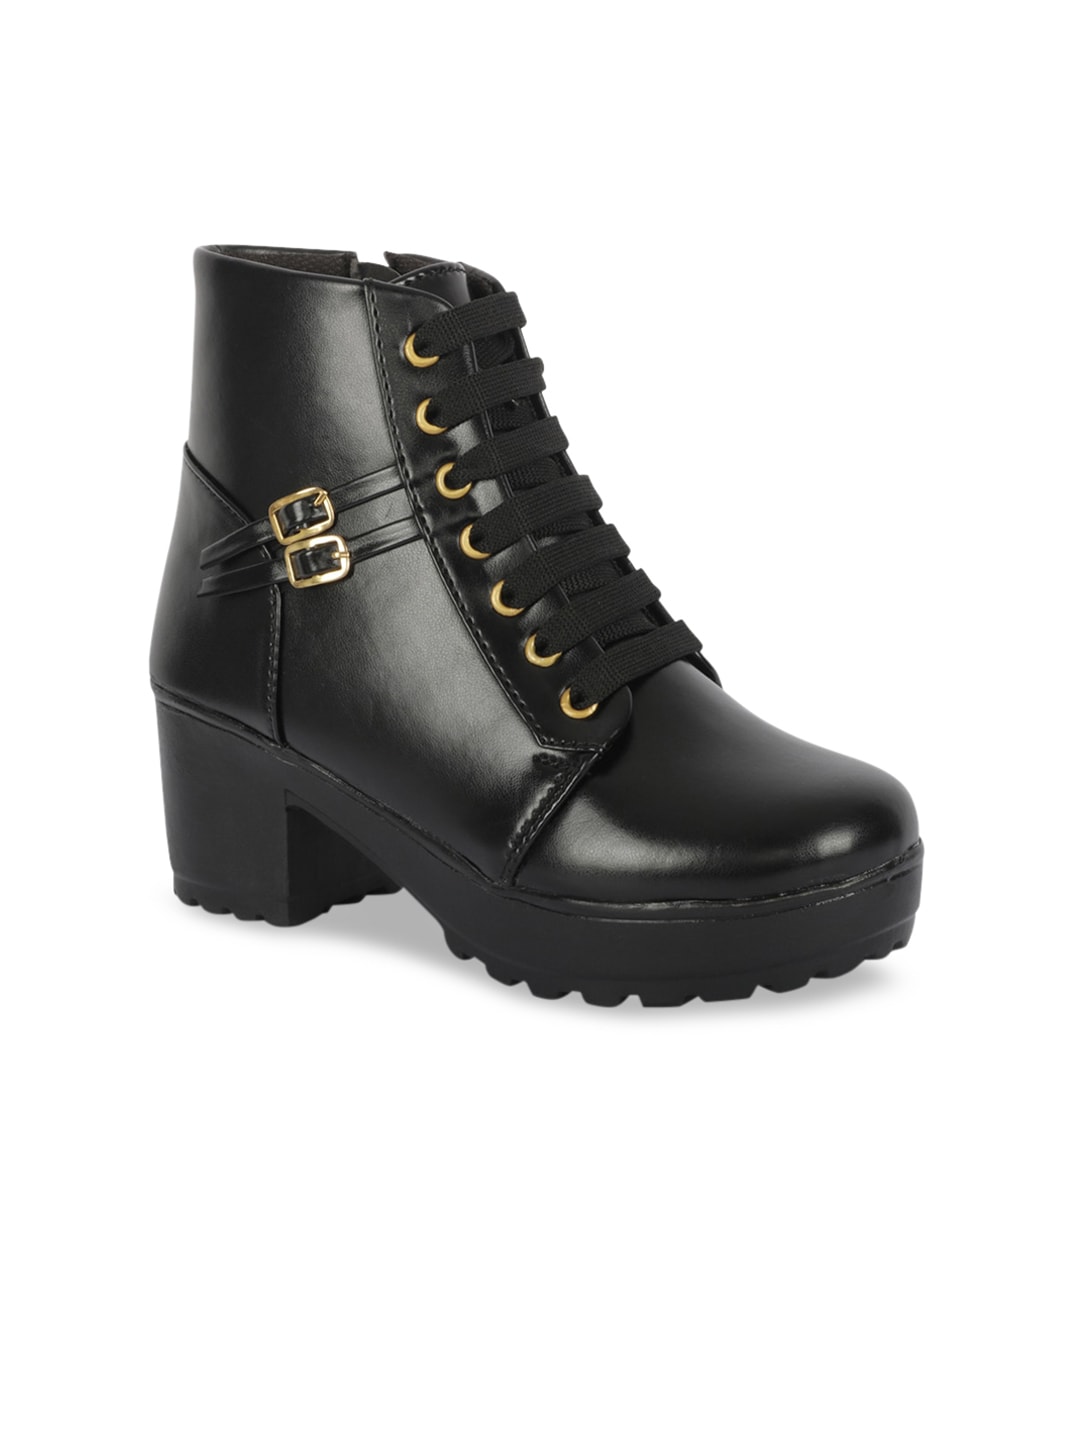 ZAPATOZ Women Black Solid Heeled Boots Price in India